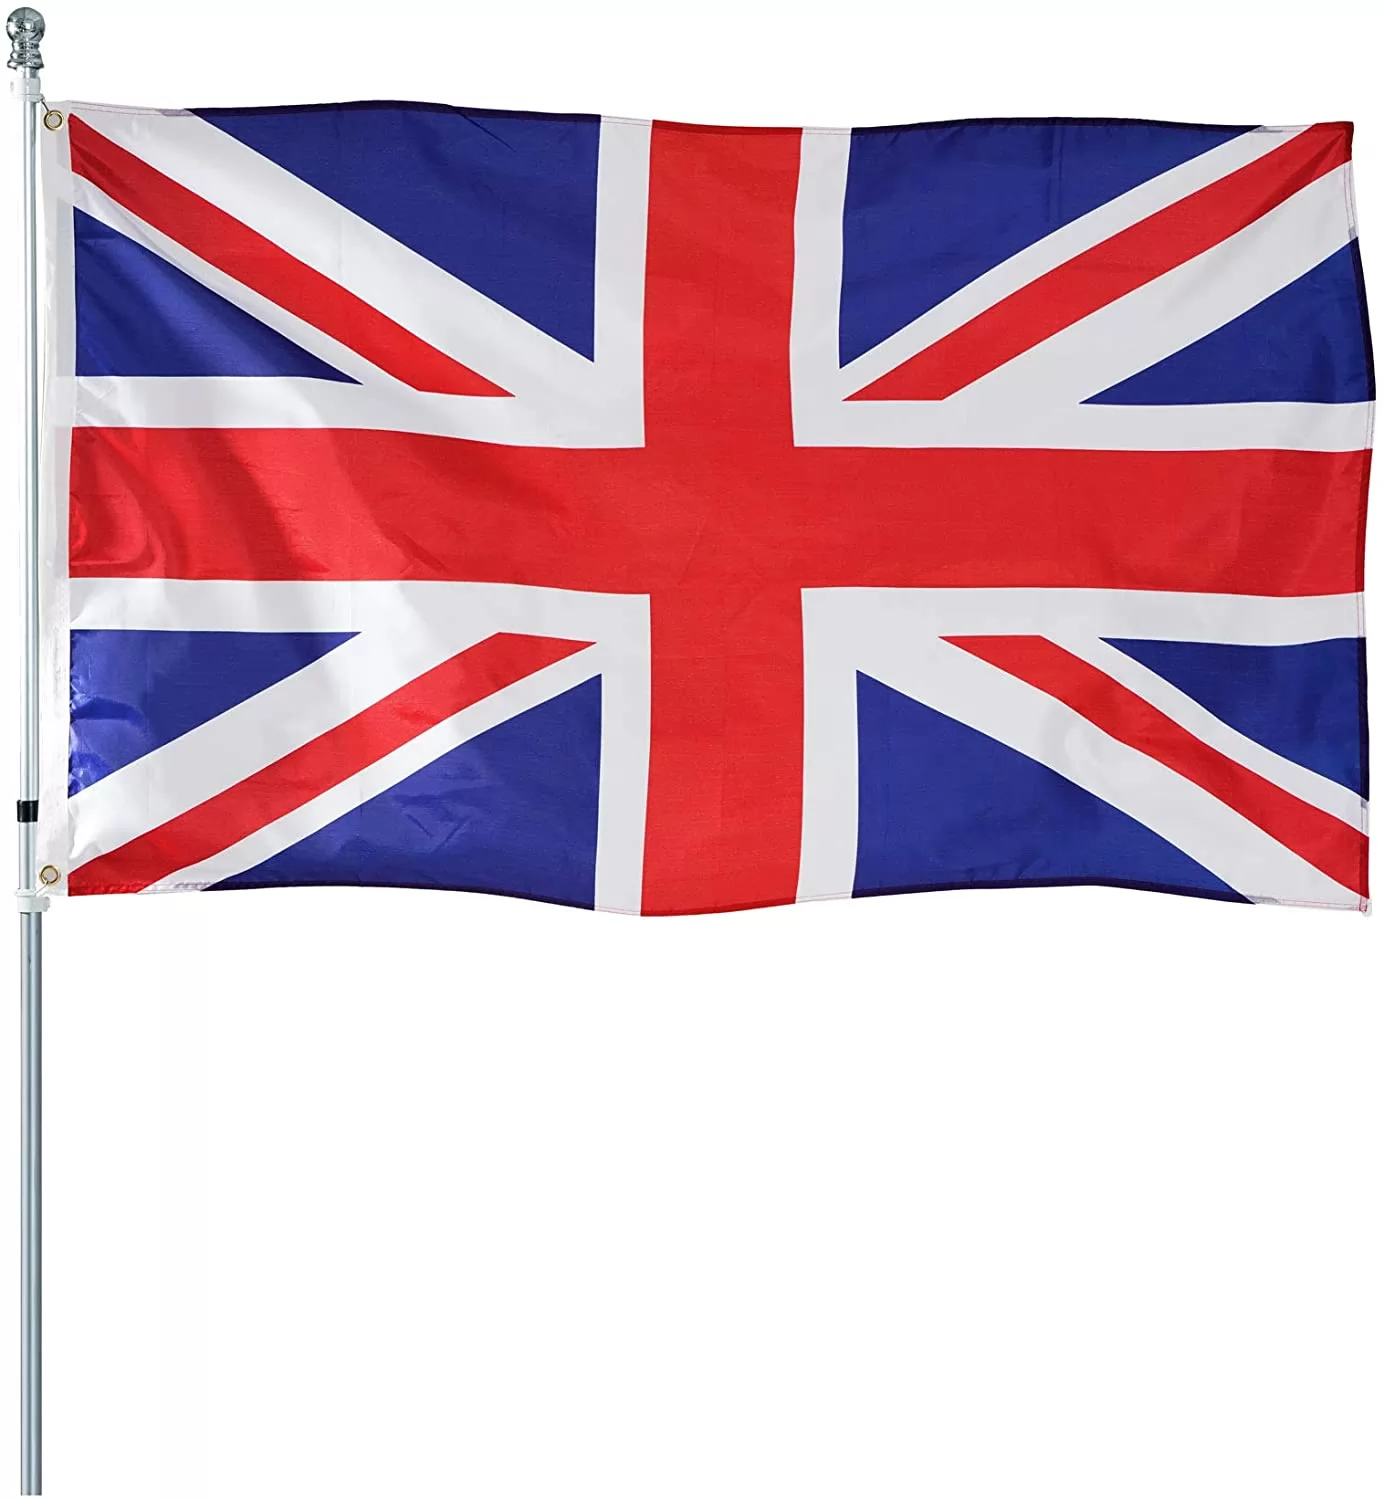 Homissor British (UK) Union Jack Flag 3x5 Outdoor- 100% Druable Polyester United Kingdom England Flags Banner with 2 Brass Grommets Vibrant Colors Bri